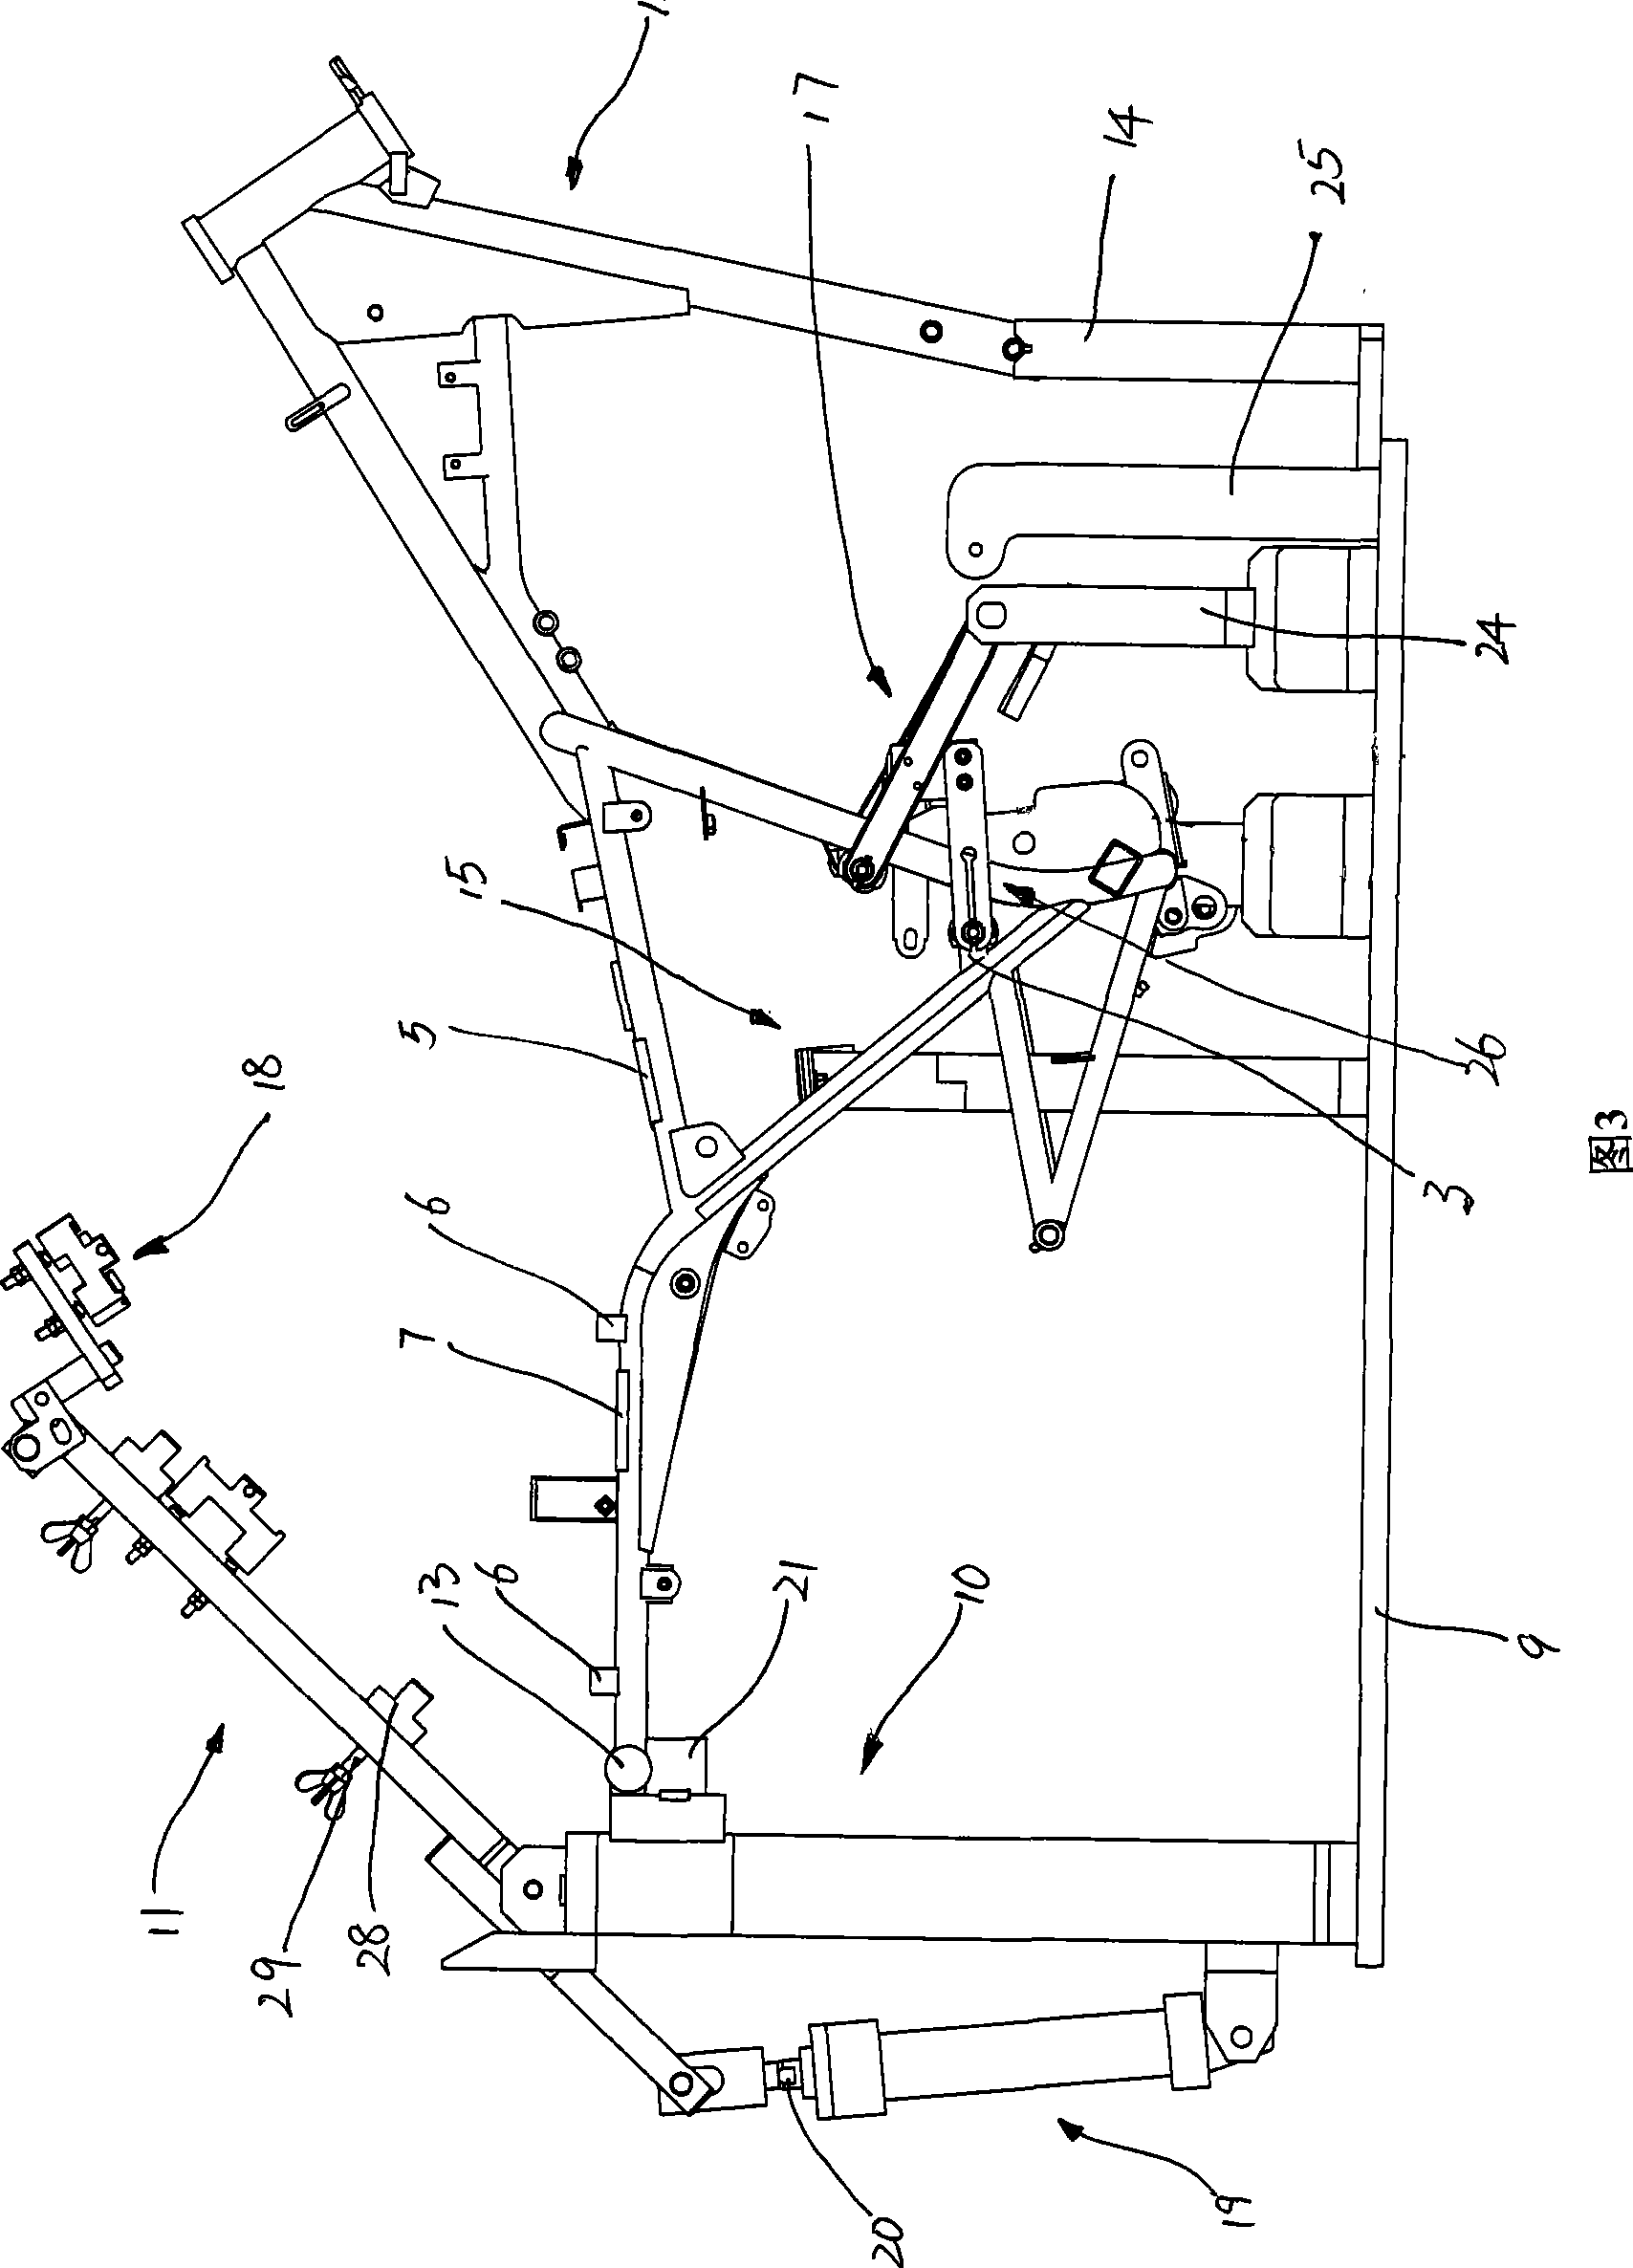 Welding clamp for vehicle frame parts and components